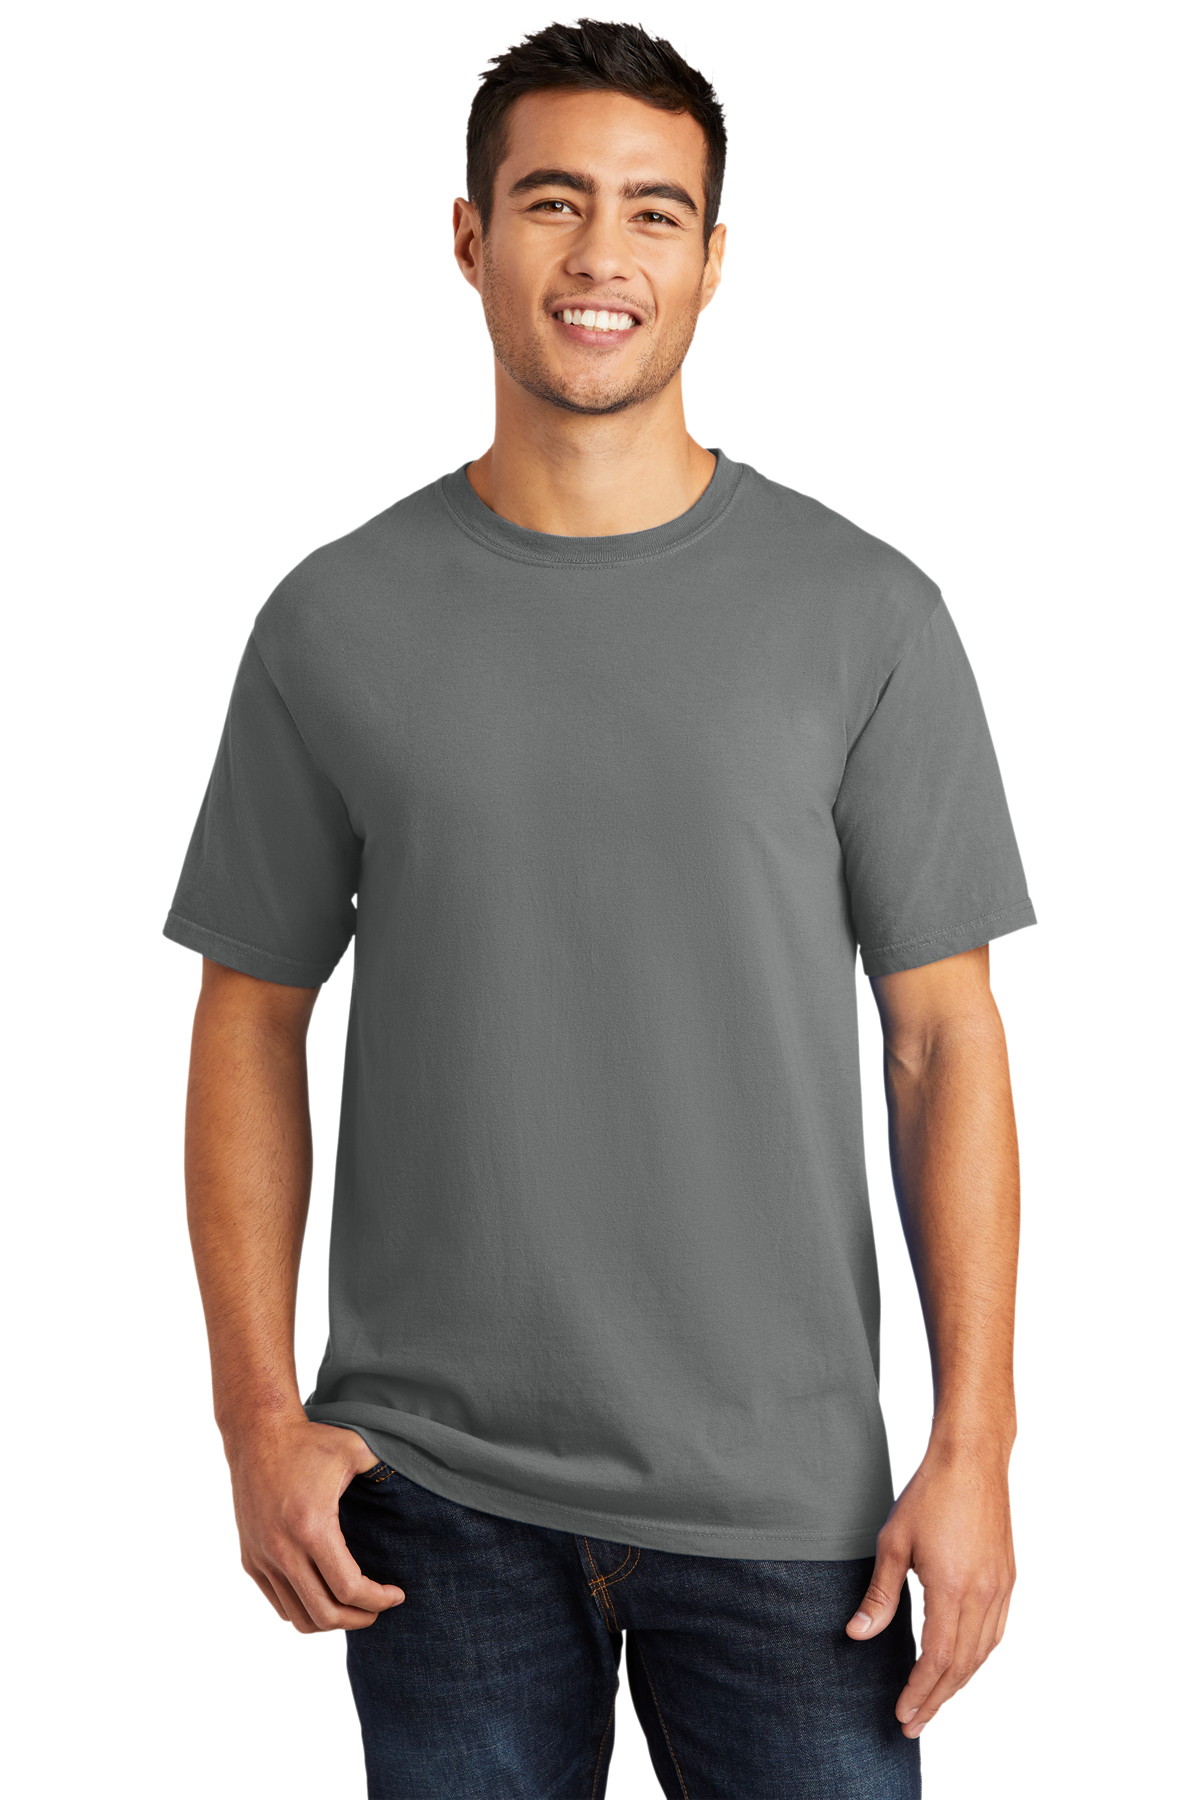 PORT AND COMPANY Pigment Dyed Pocket Tee PC099P 